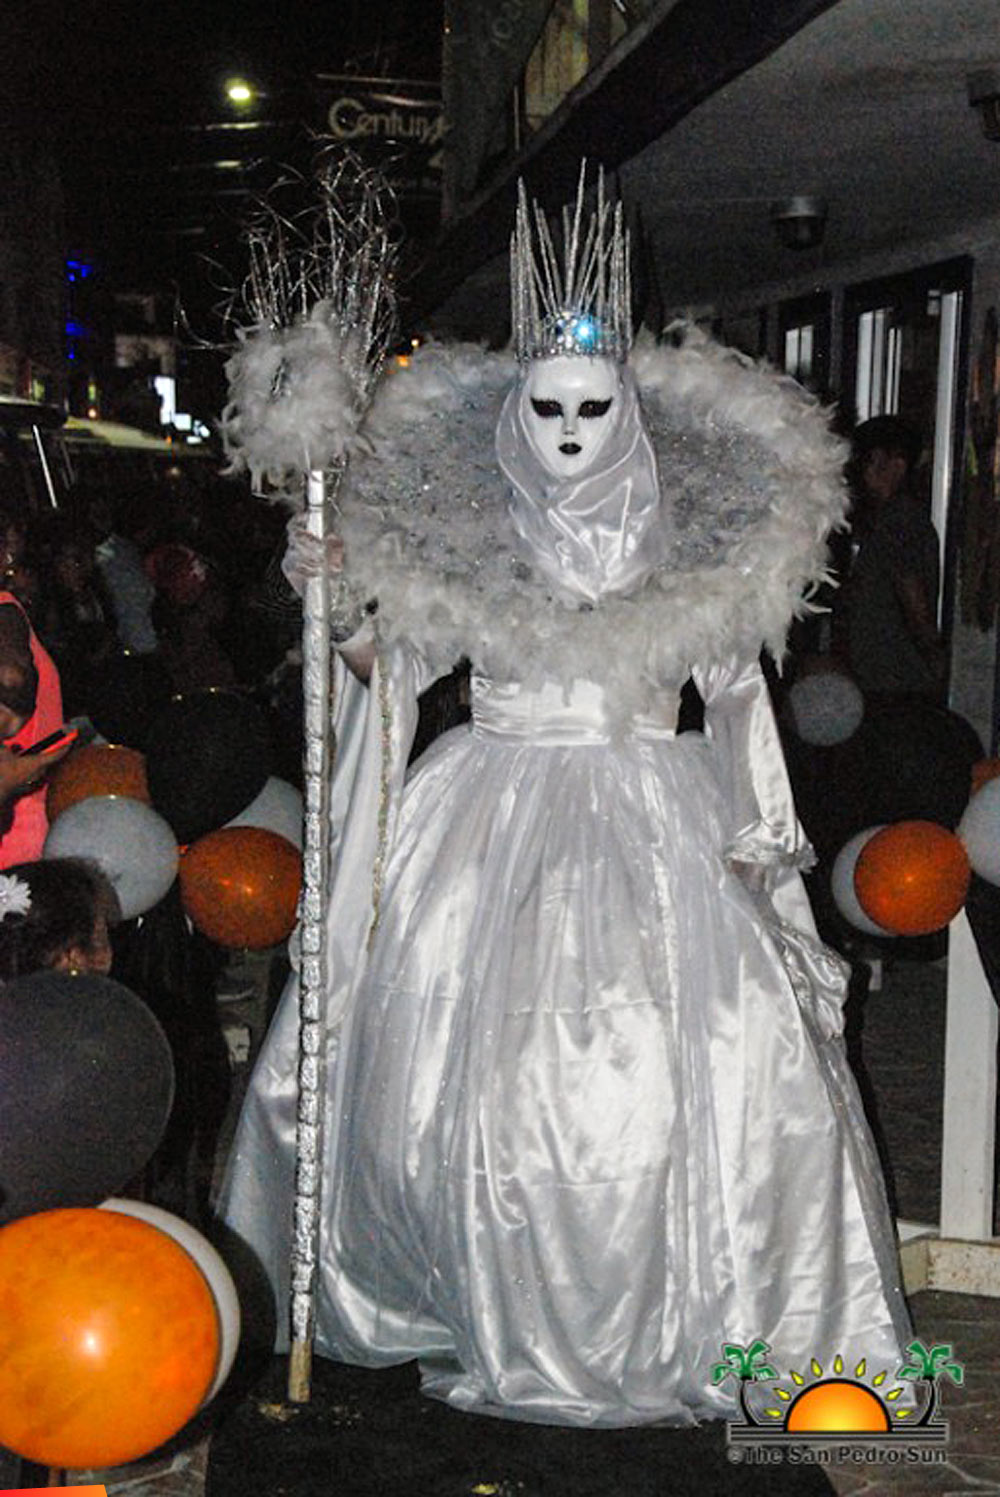 Alex Rodriguez, the ‘Snow Queen,’ winner of the 2018 Holiday Hotel Halloween Most Creative prize